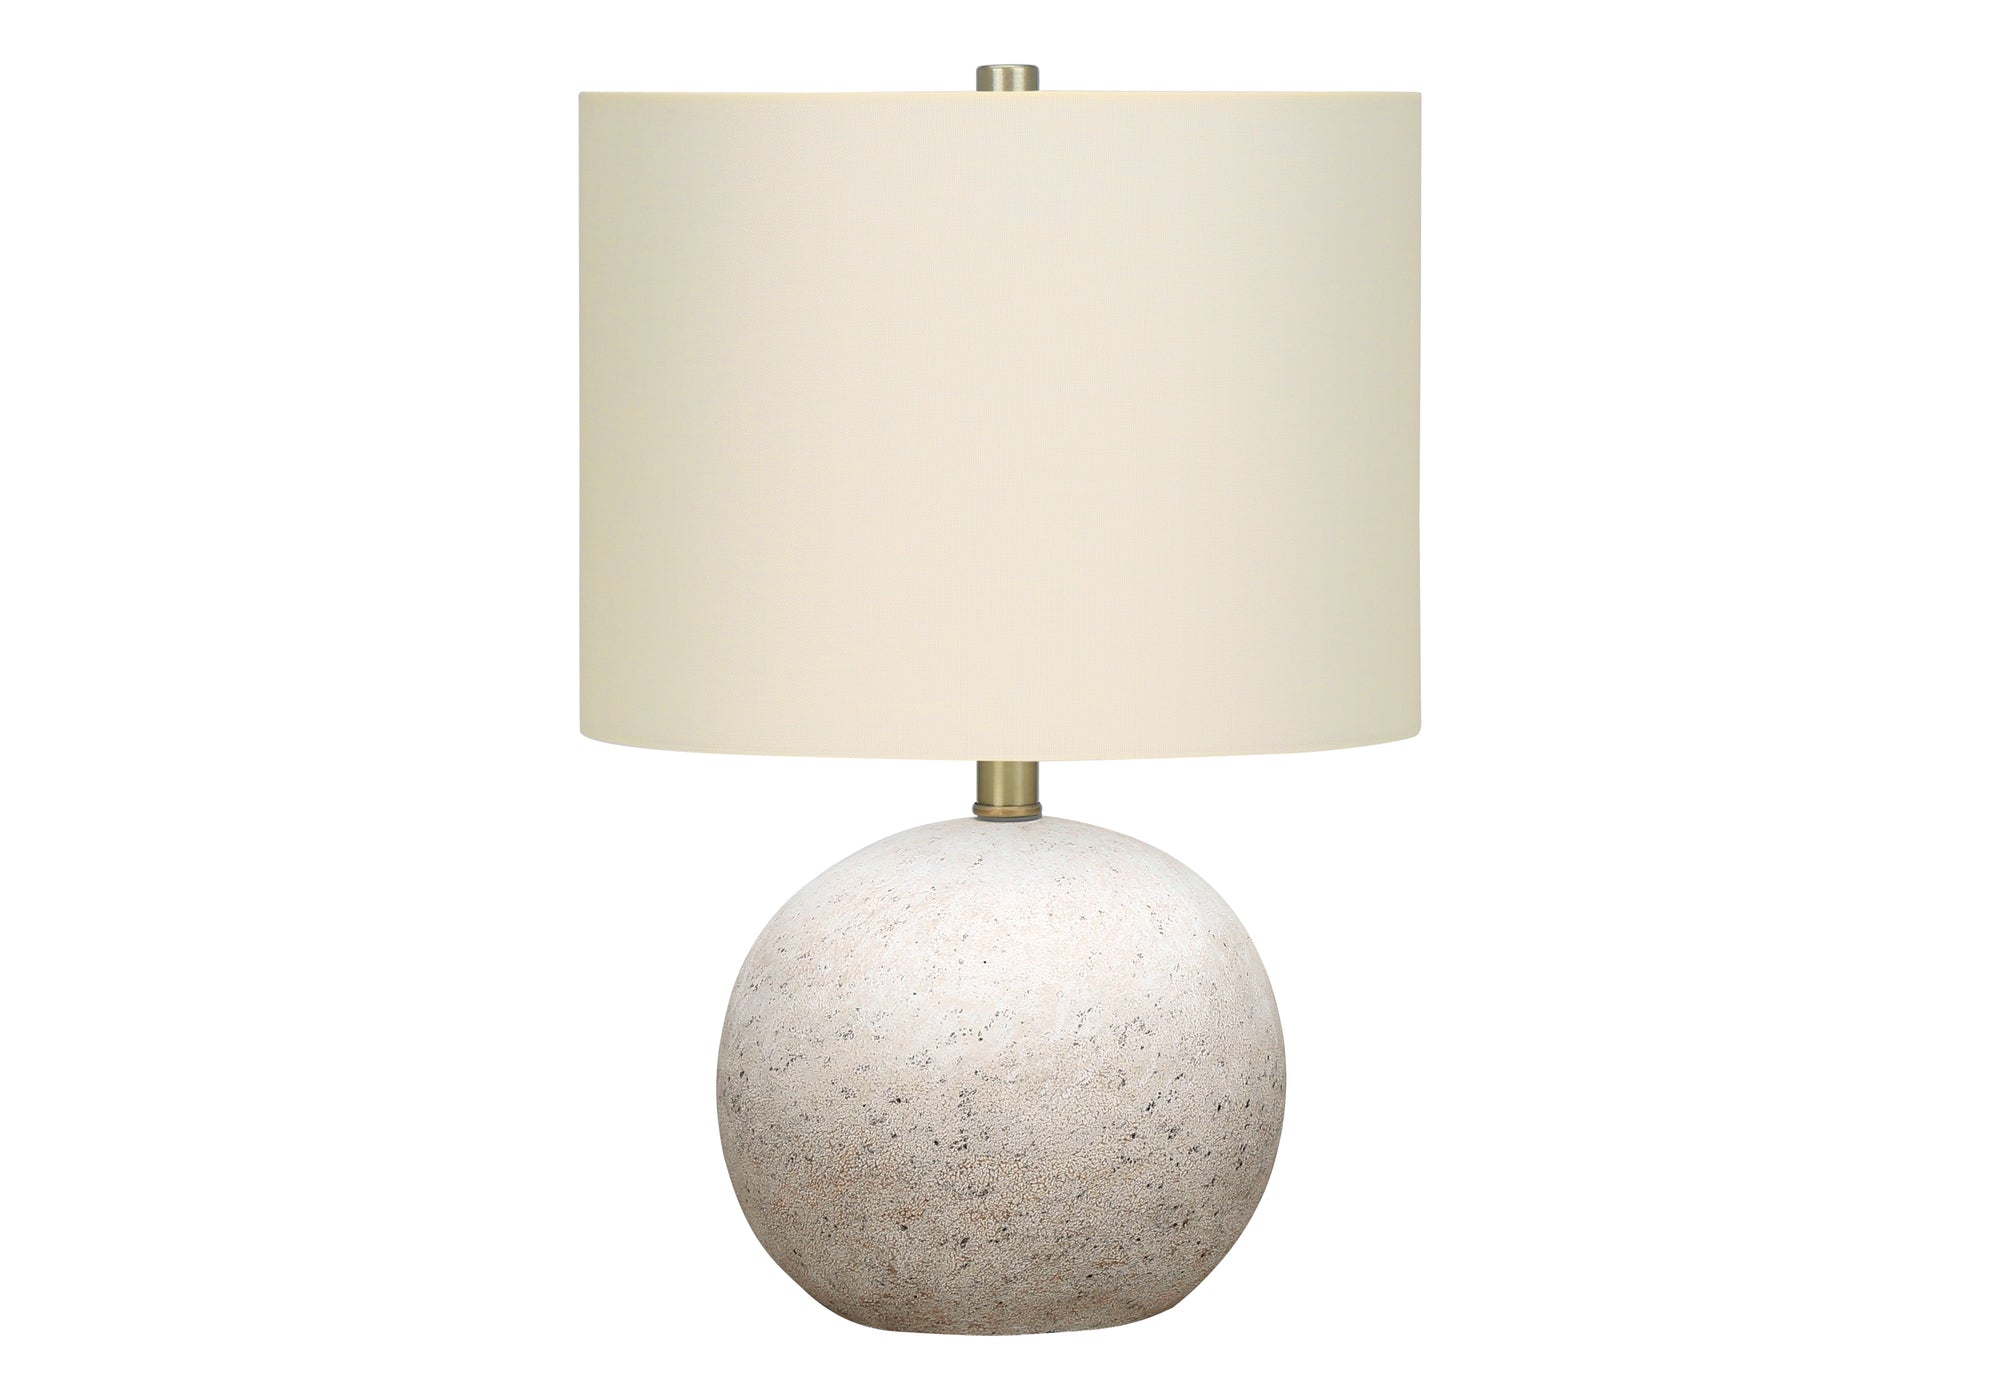 MN-519717    Lighting, 20"H, Table Lamp, Grey Concrete, Ivory / Cream Shade, Contemporary